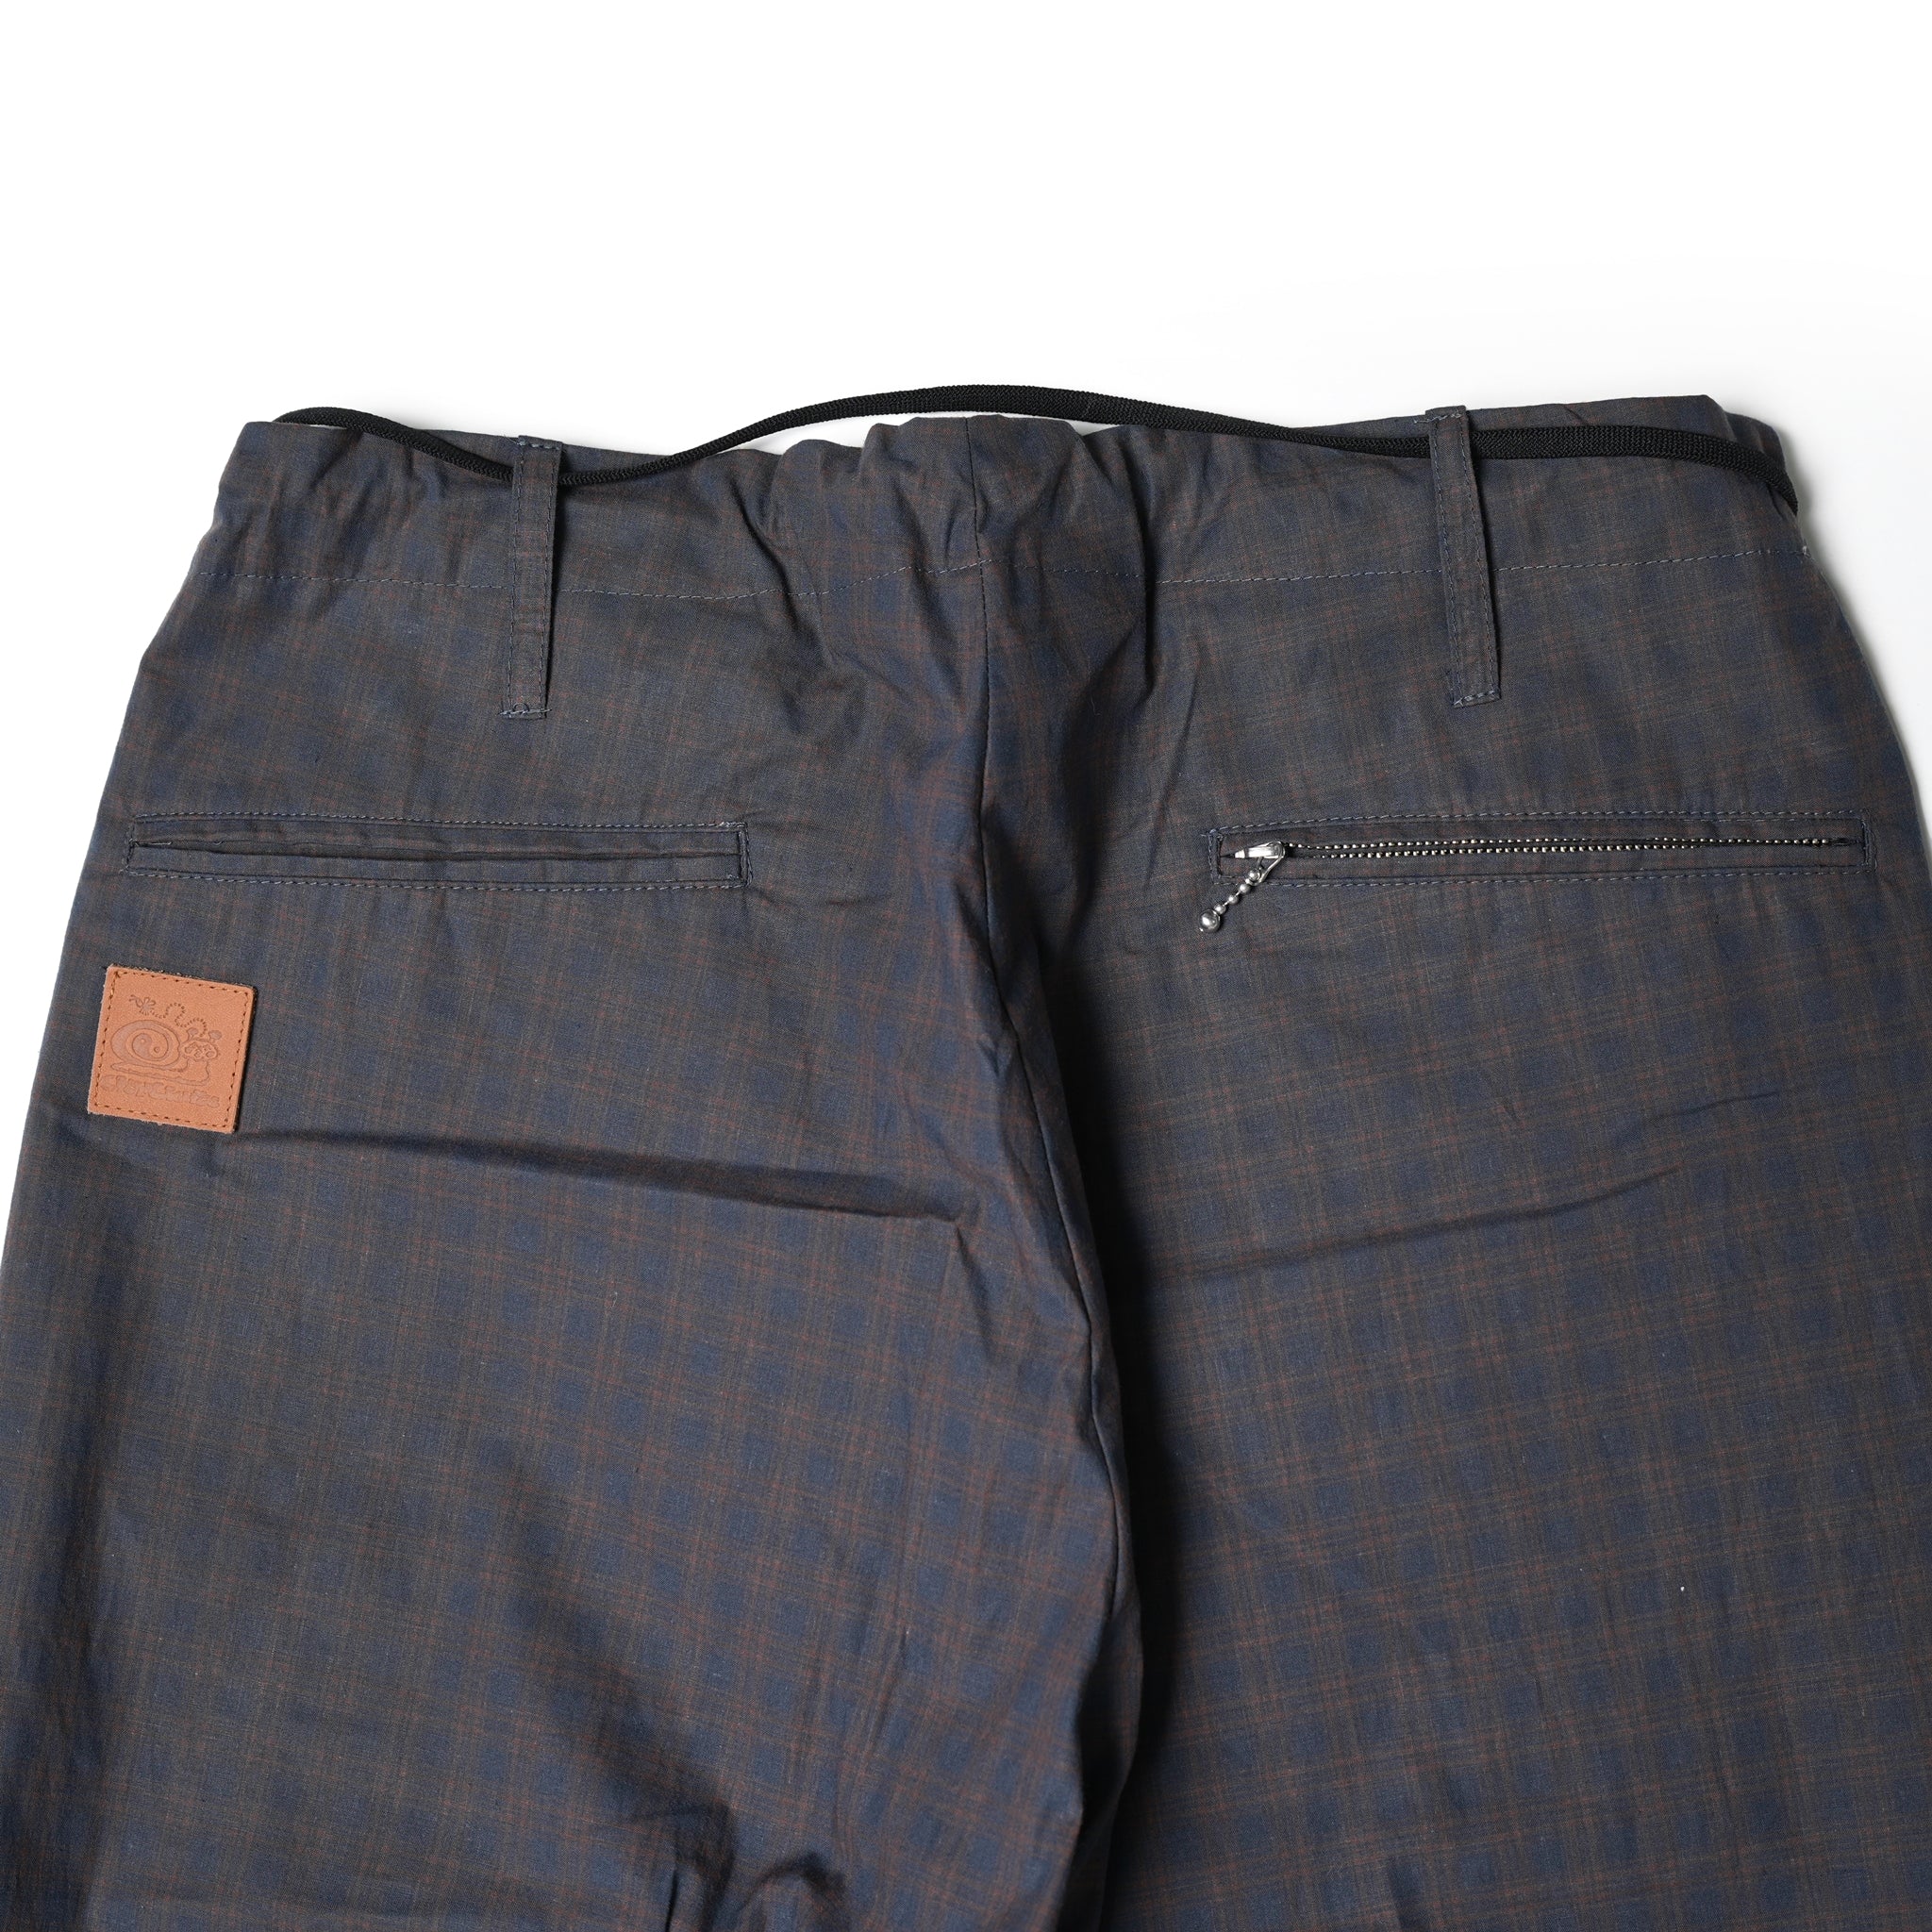 Name: Non-Elastic E-Z Pants Dead Stock Fabric Collection | Color:Navy Plaid | Size: One Fits All 【CITYLIGHTS PRODUCTS_シティライツプロダクツ】